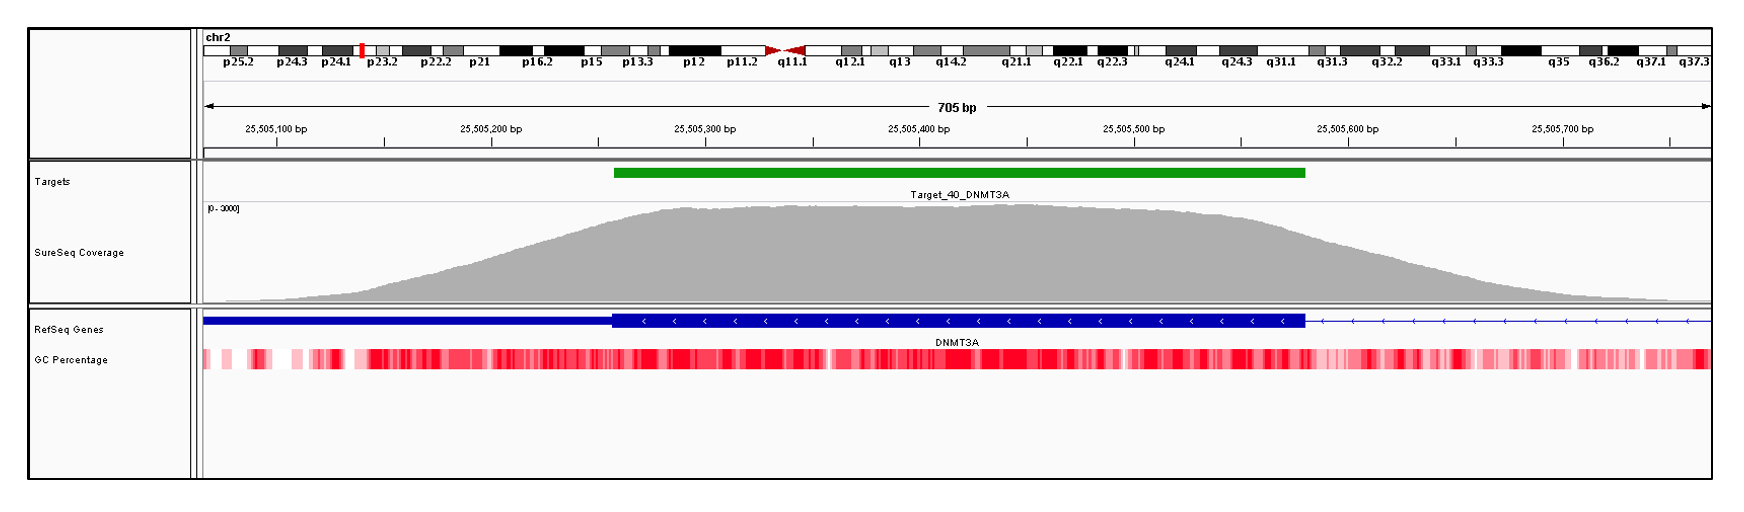 DNMT3A Exon 4 (hg19 chr2:25505310-25505580). Depth of coverage per base (grey). Targeted region (green). Gene coding region as defined by RefSeq (blue). GC percentage (red). Image